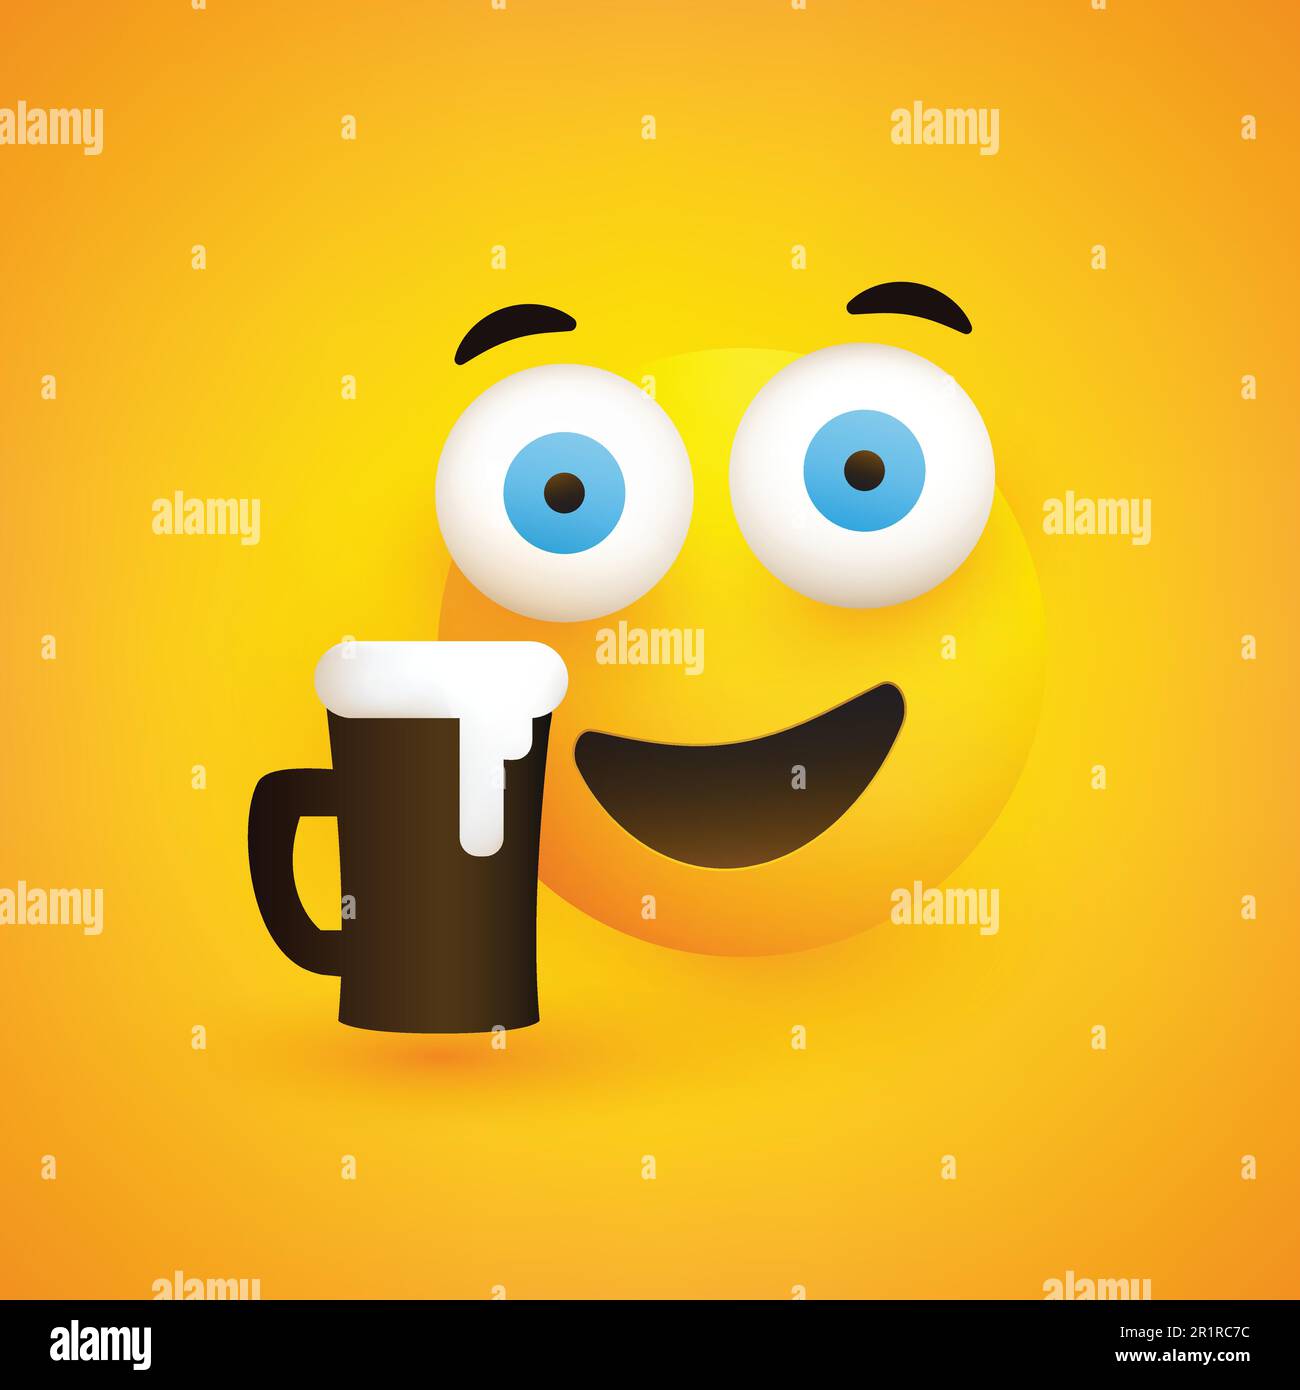 Smiling Emoji - Simple Happy Emoticon with Pop Out Eyes and a Glass of Beer on Yellow Background Stock Vector